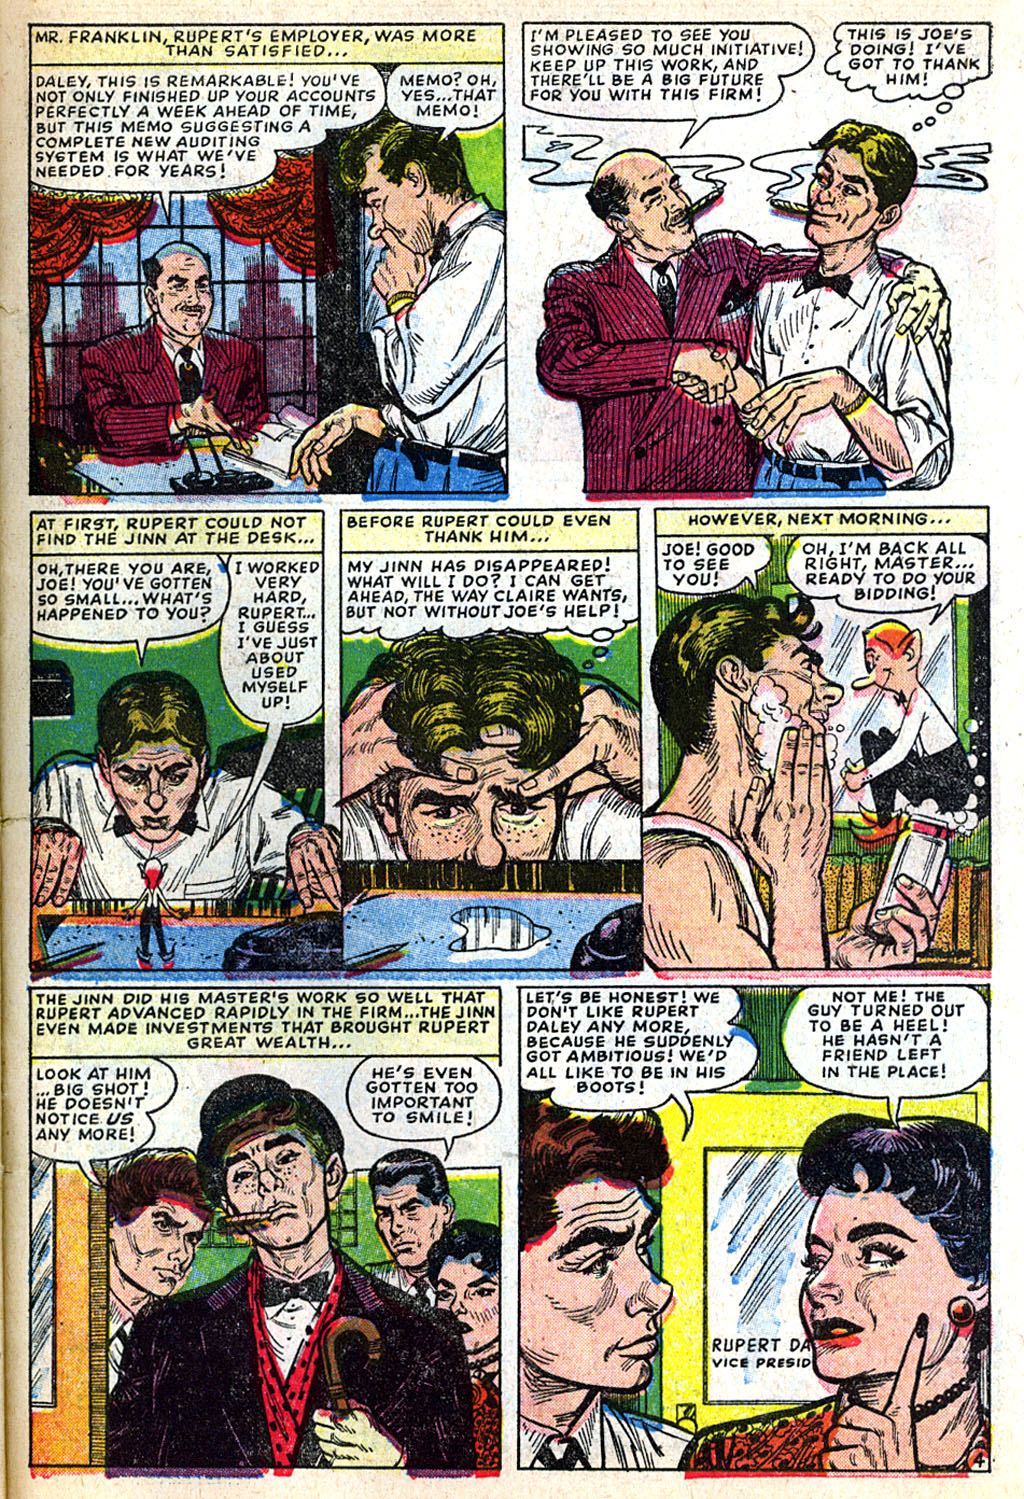 Marvel Tales (1949) 137 Page 30